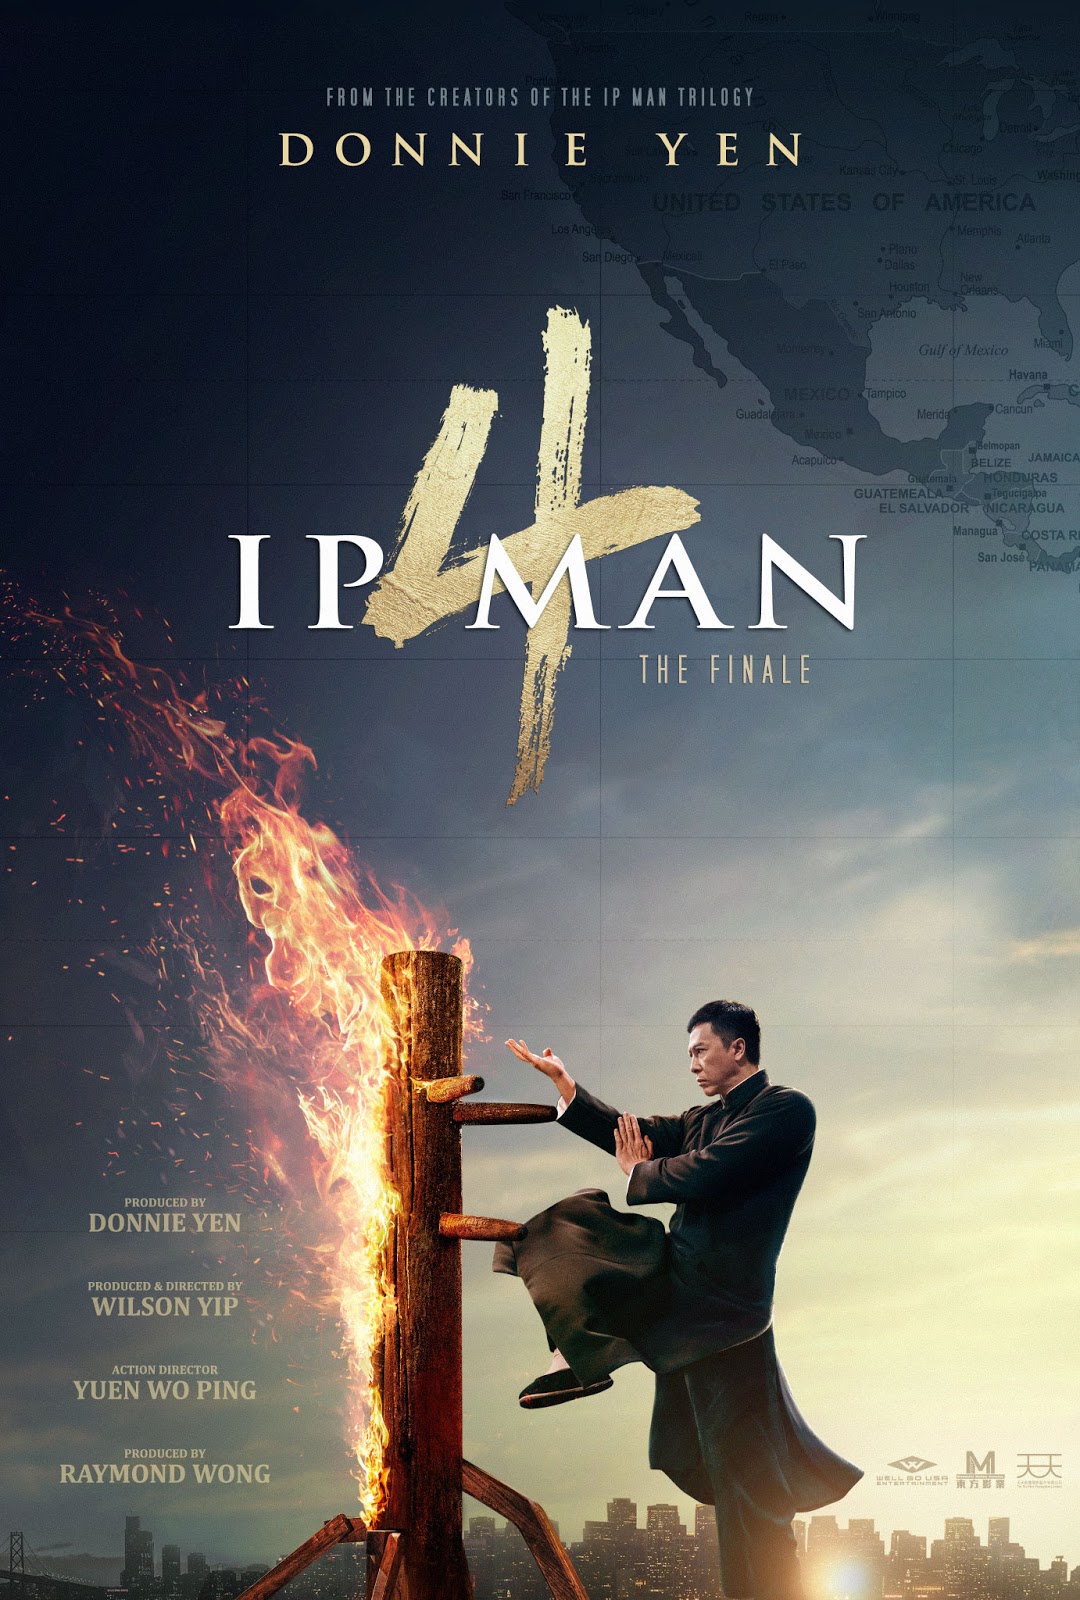 AsianCineFest: IP MAN 4: THE FINALE opens December 25th ...